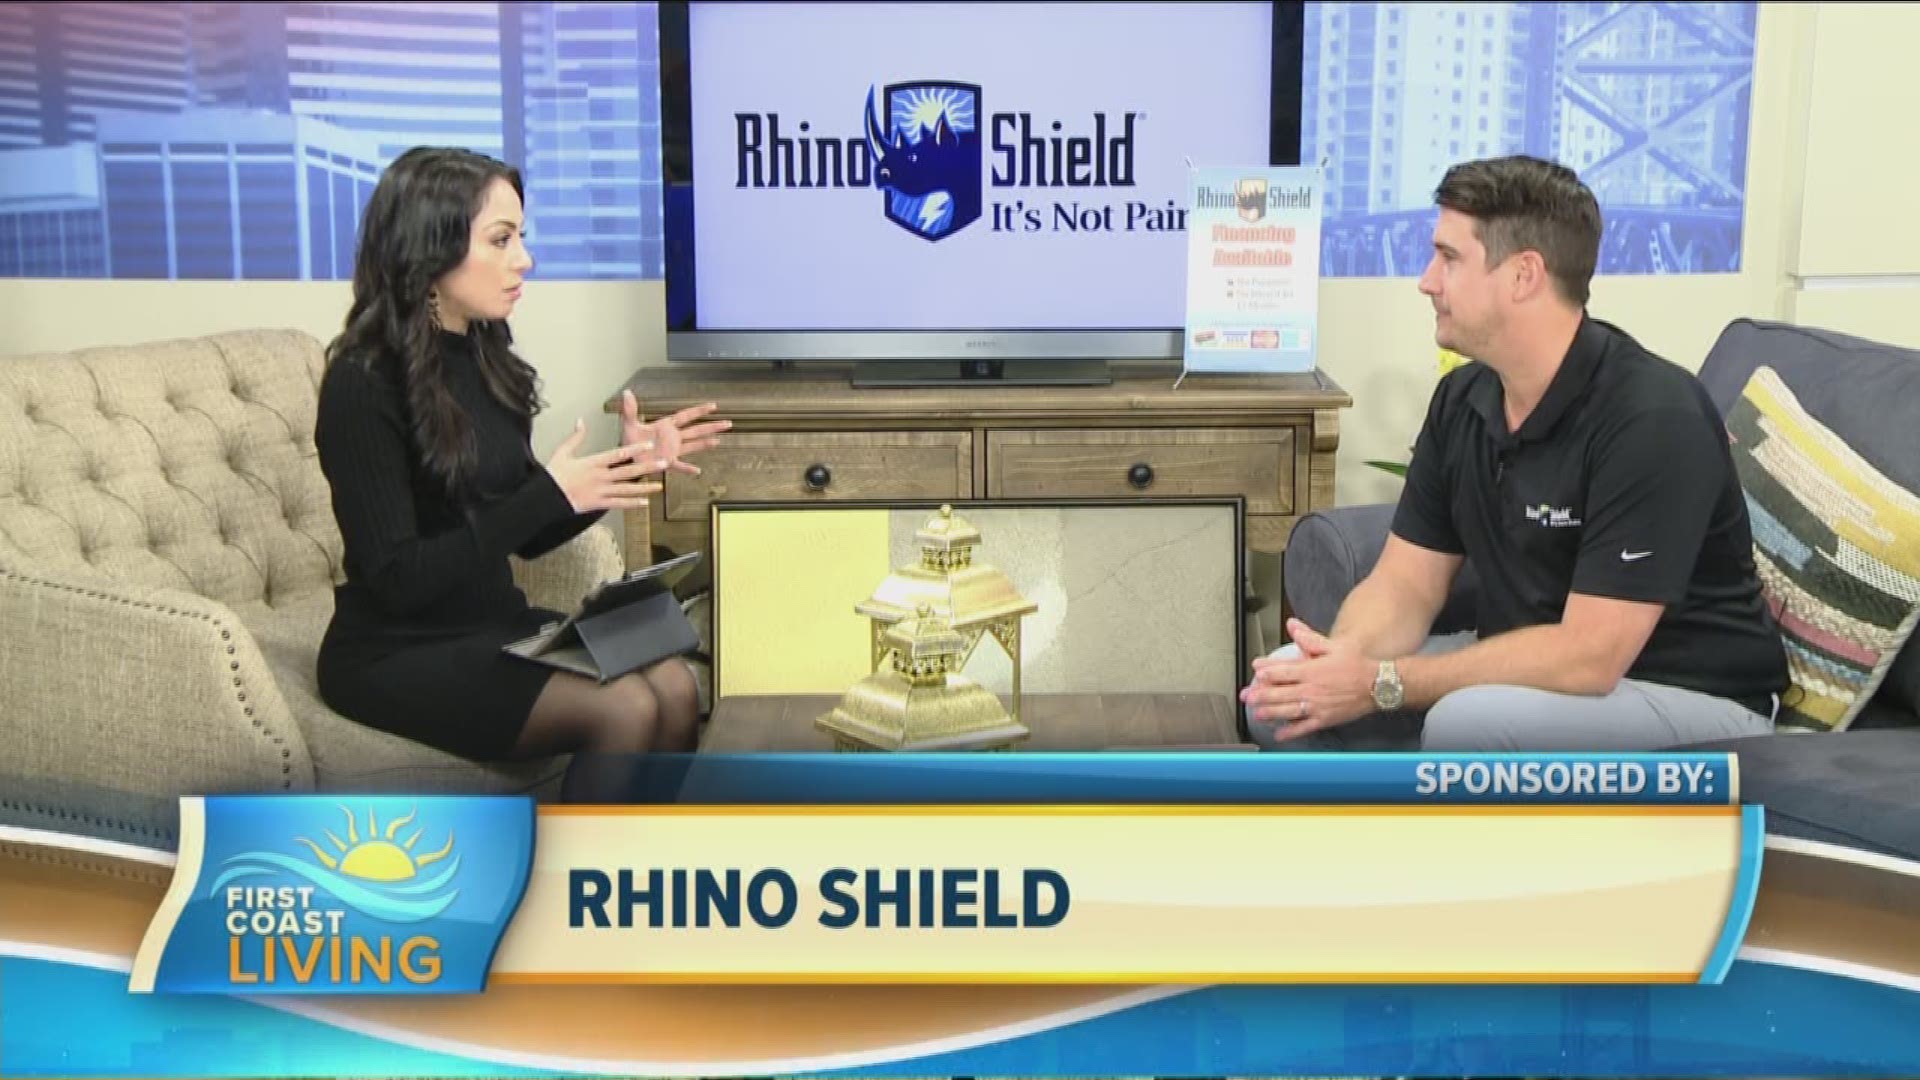 For many, their homes are a big investment. Rhino Shield says their team can help people protect their homes and their wallets.